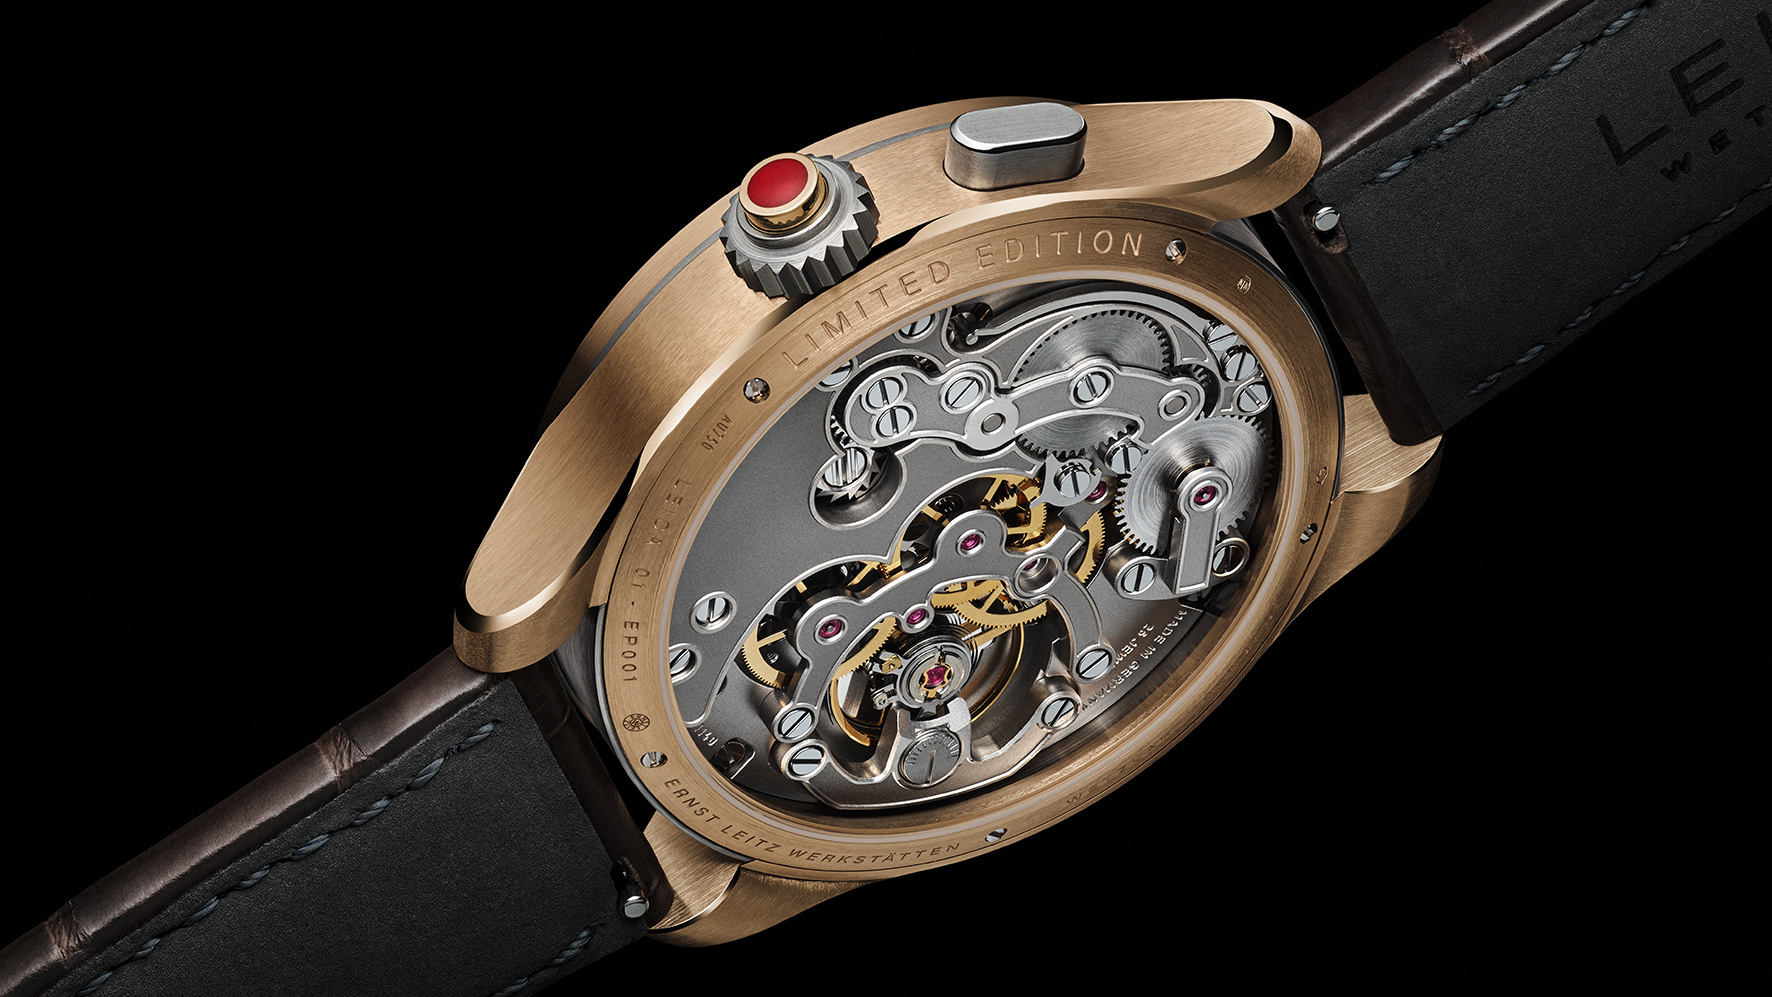 Leica_Watch_ZM_1_Gold_limited_Edition_back_HiRes_Kopie.jpg